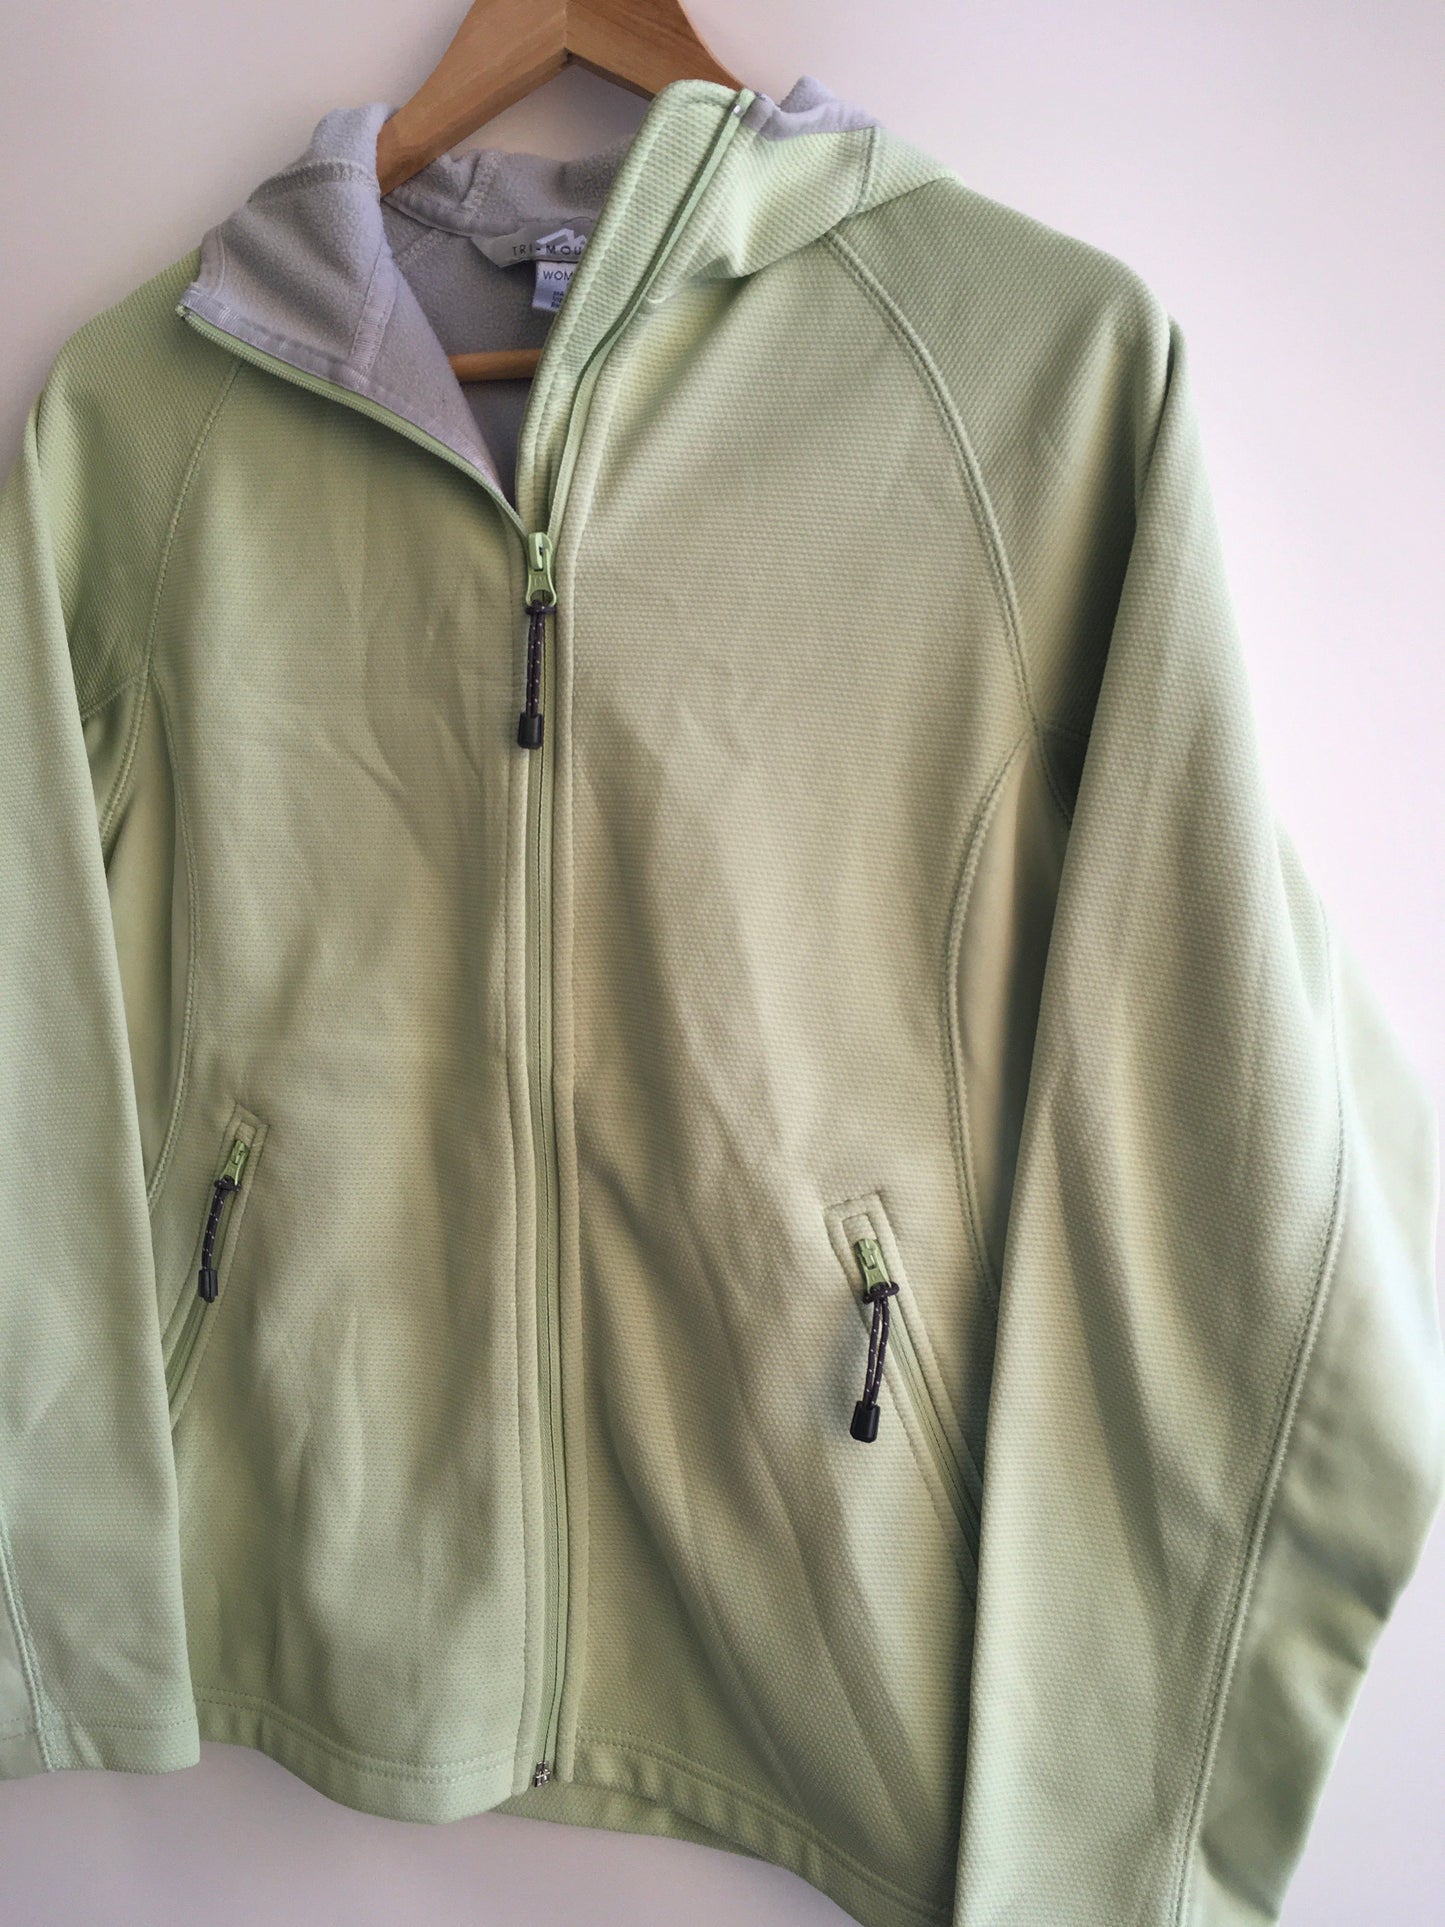 Athletic Jacket By Tri Mountain Size: S